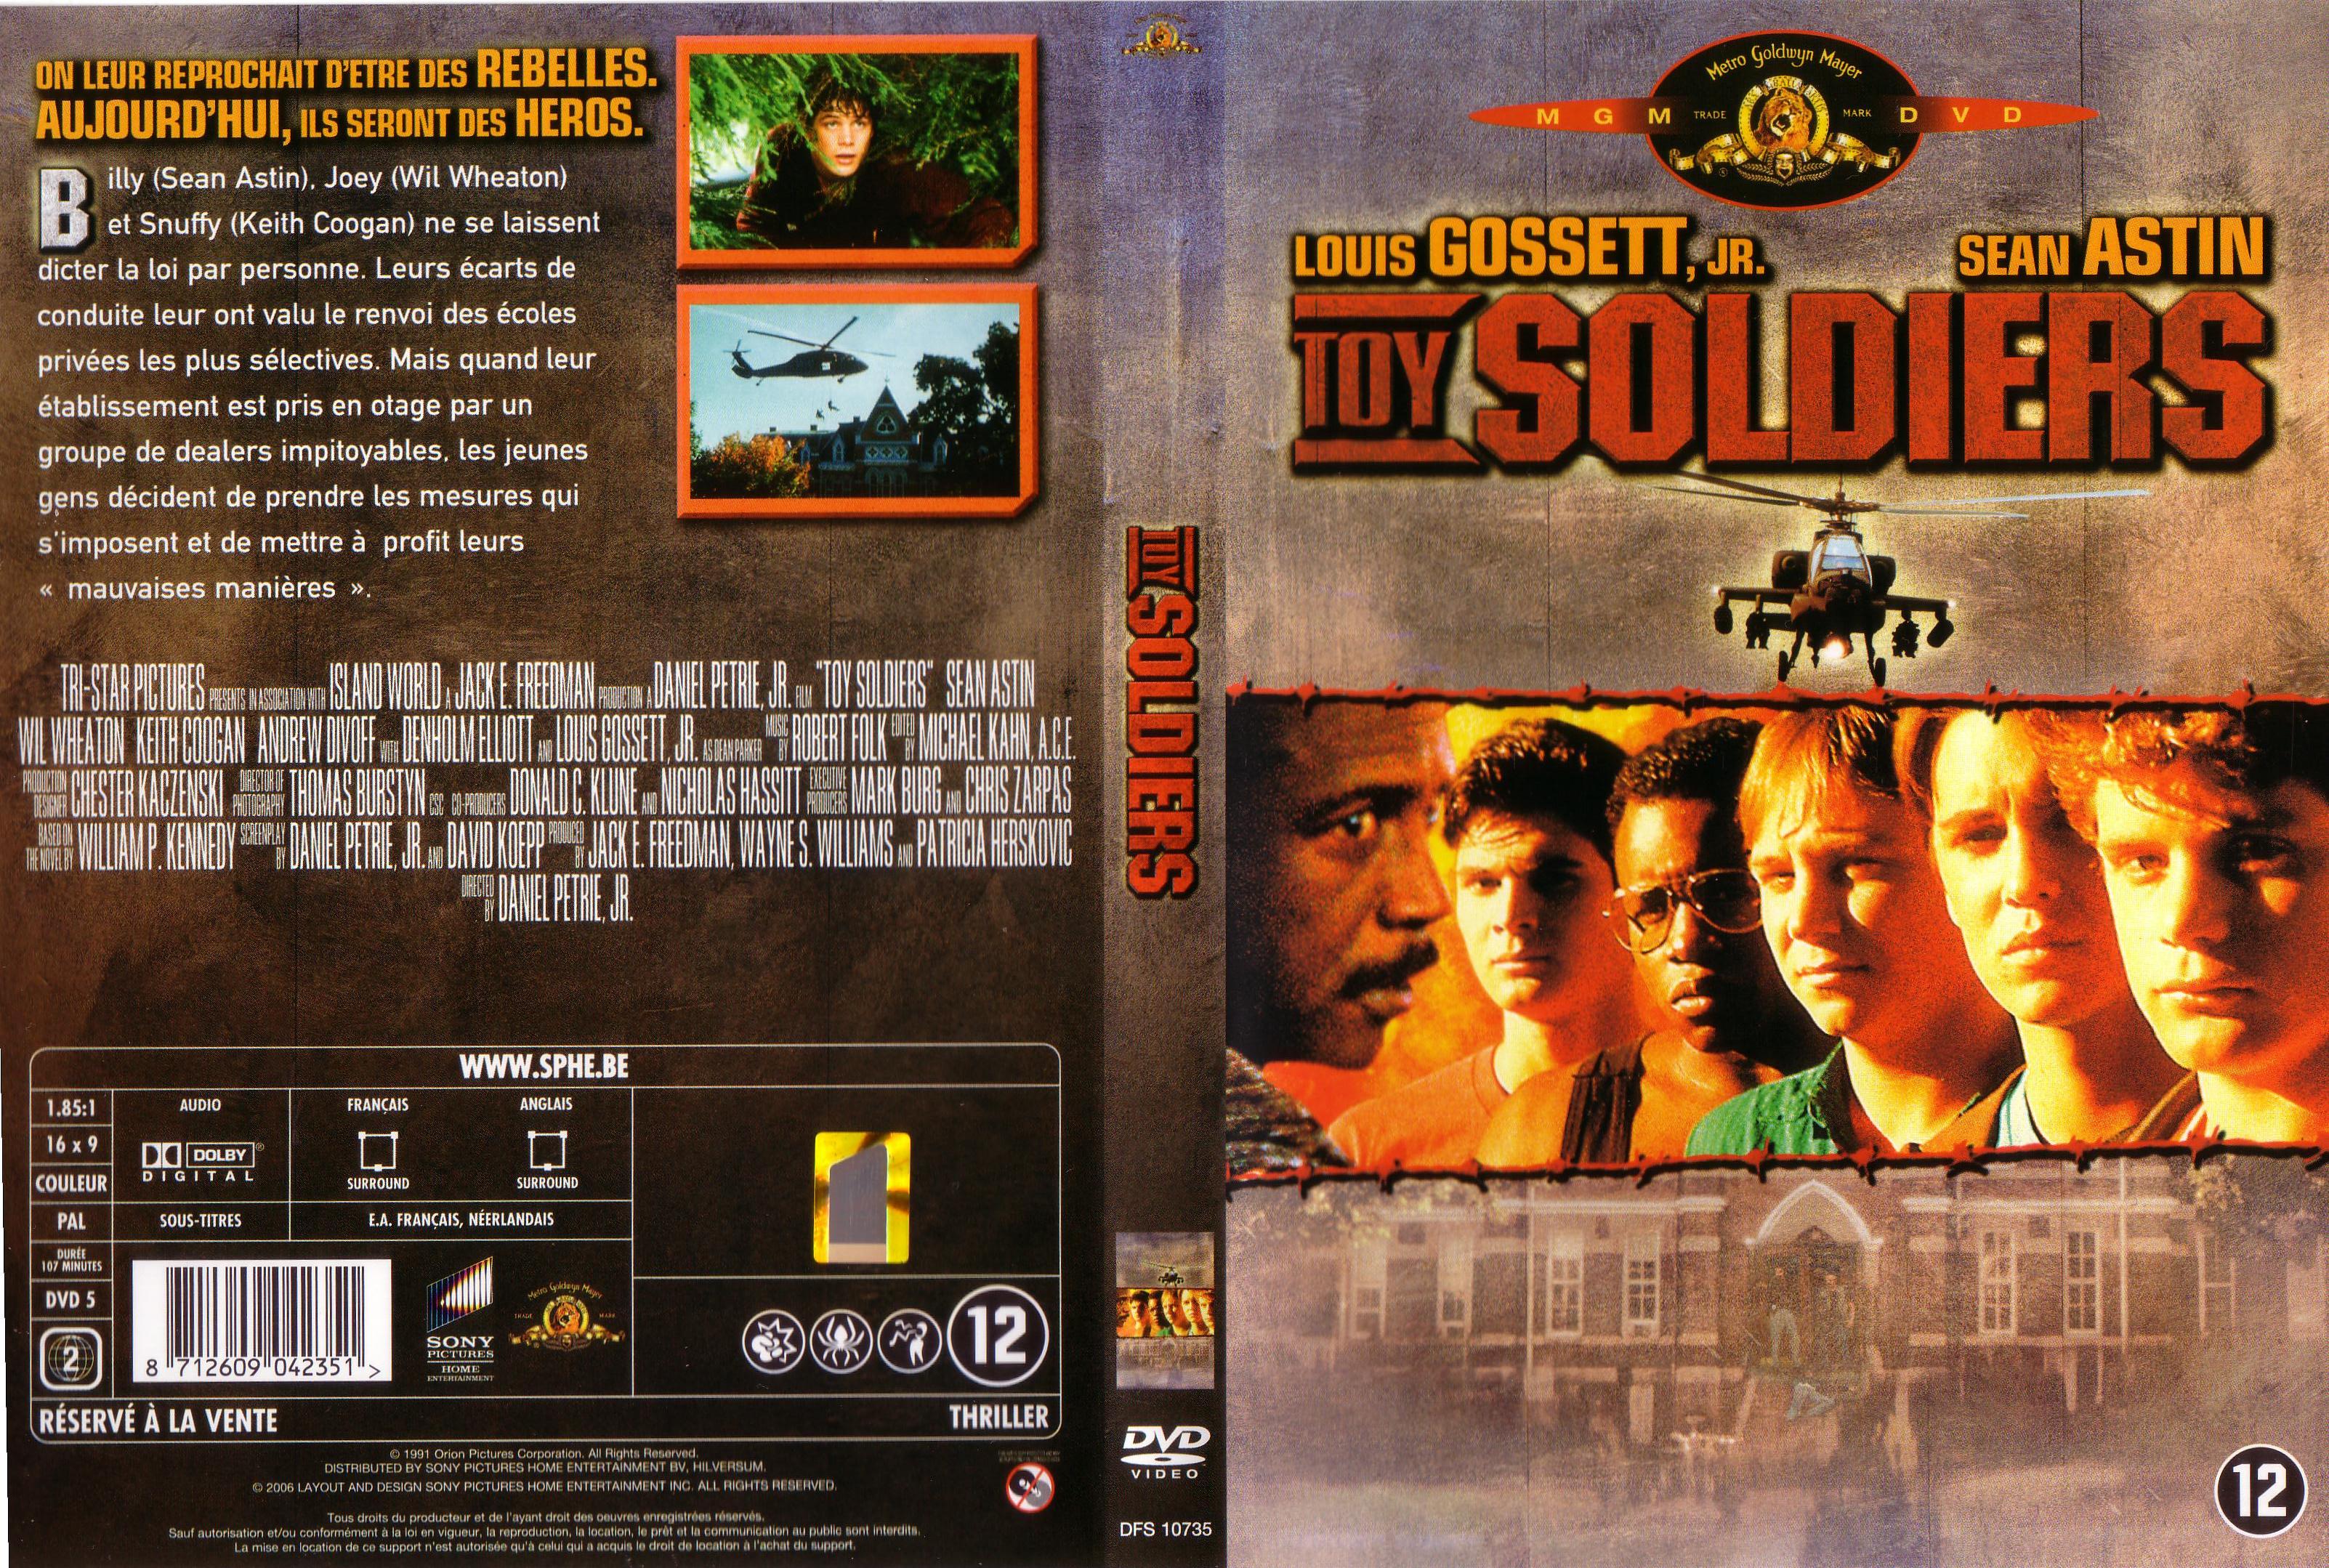 Jaquette DVD Toy soldiers